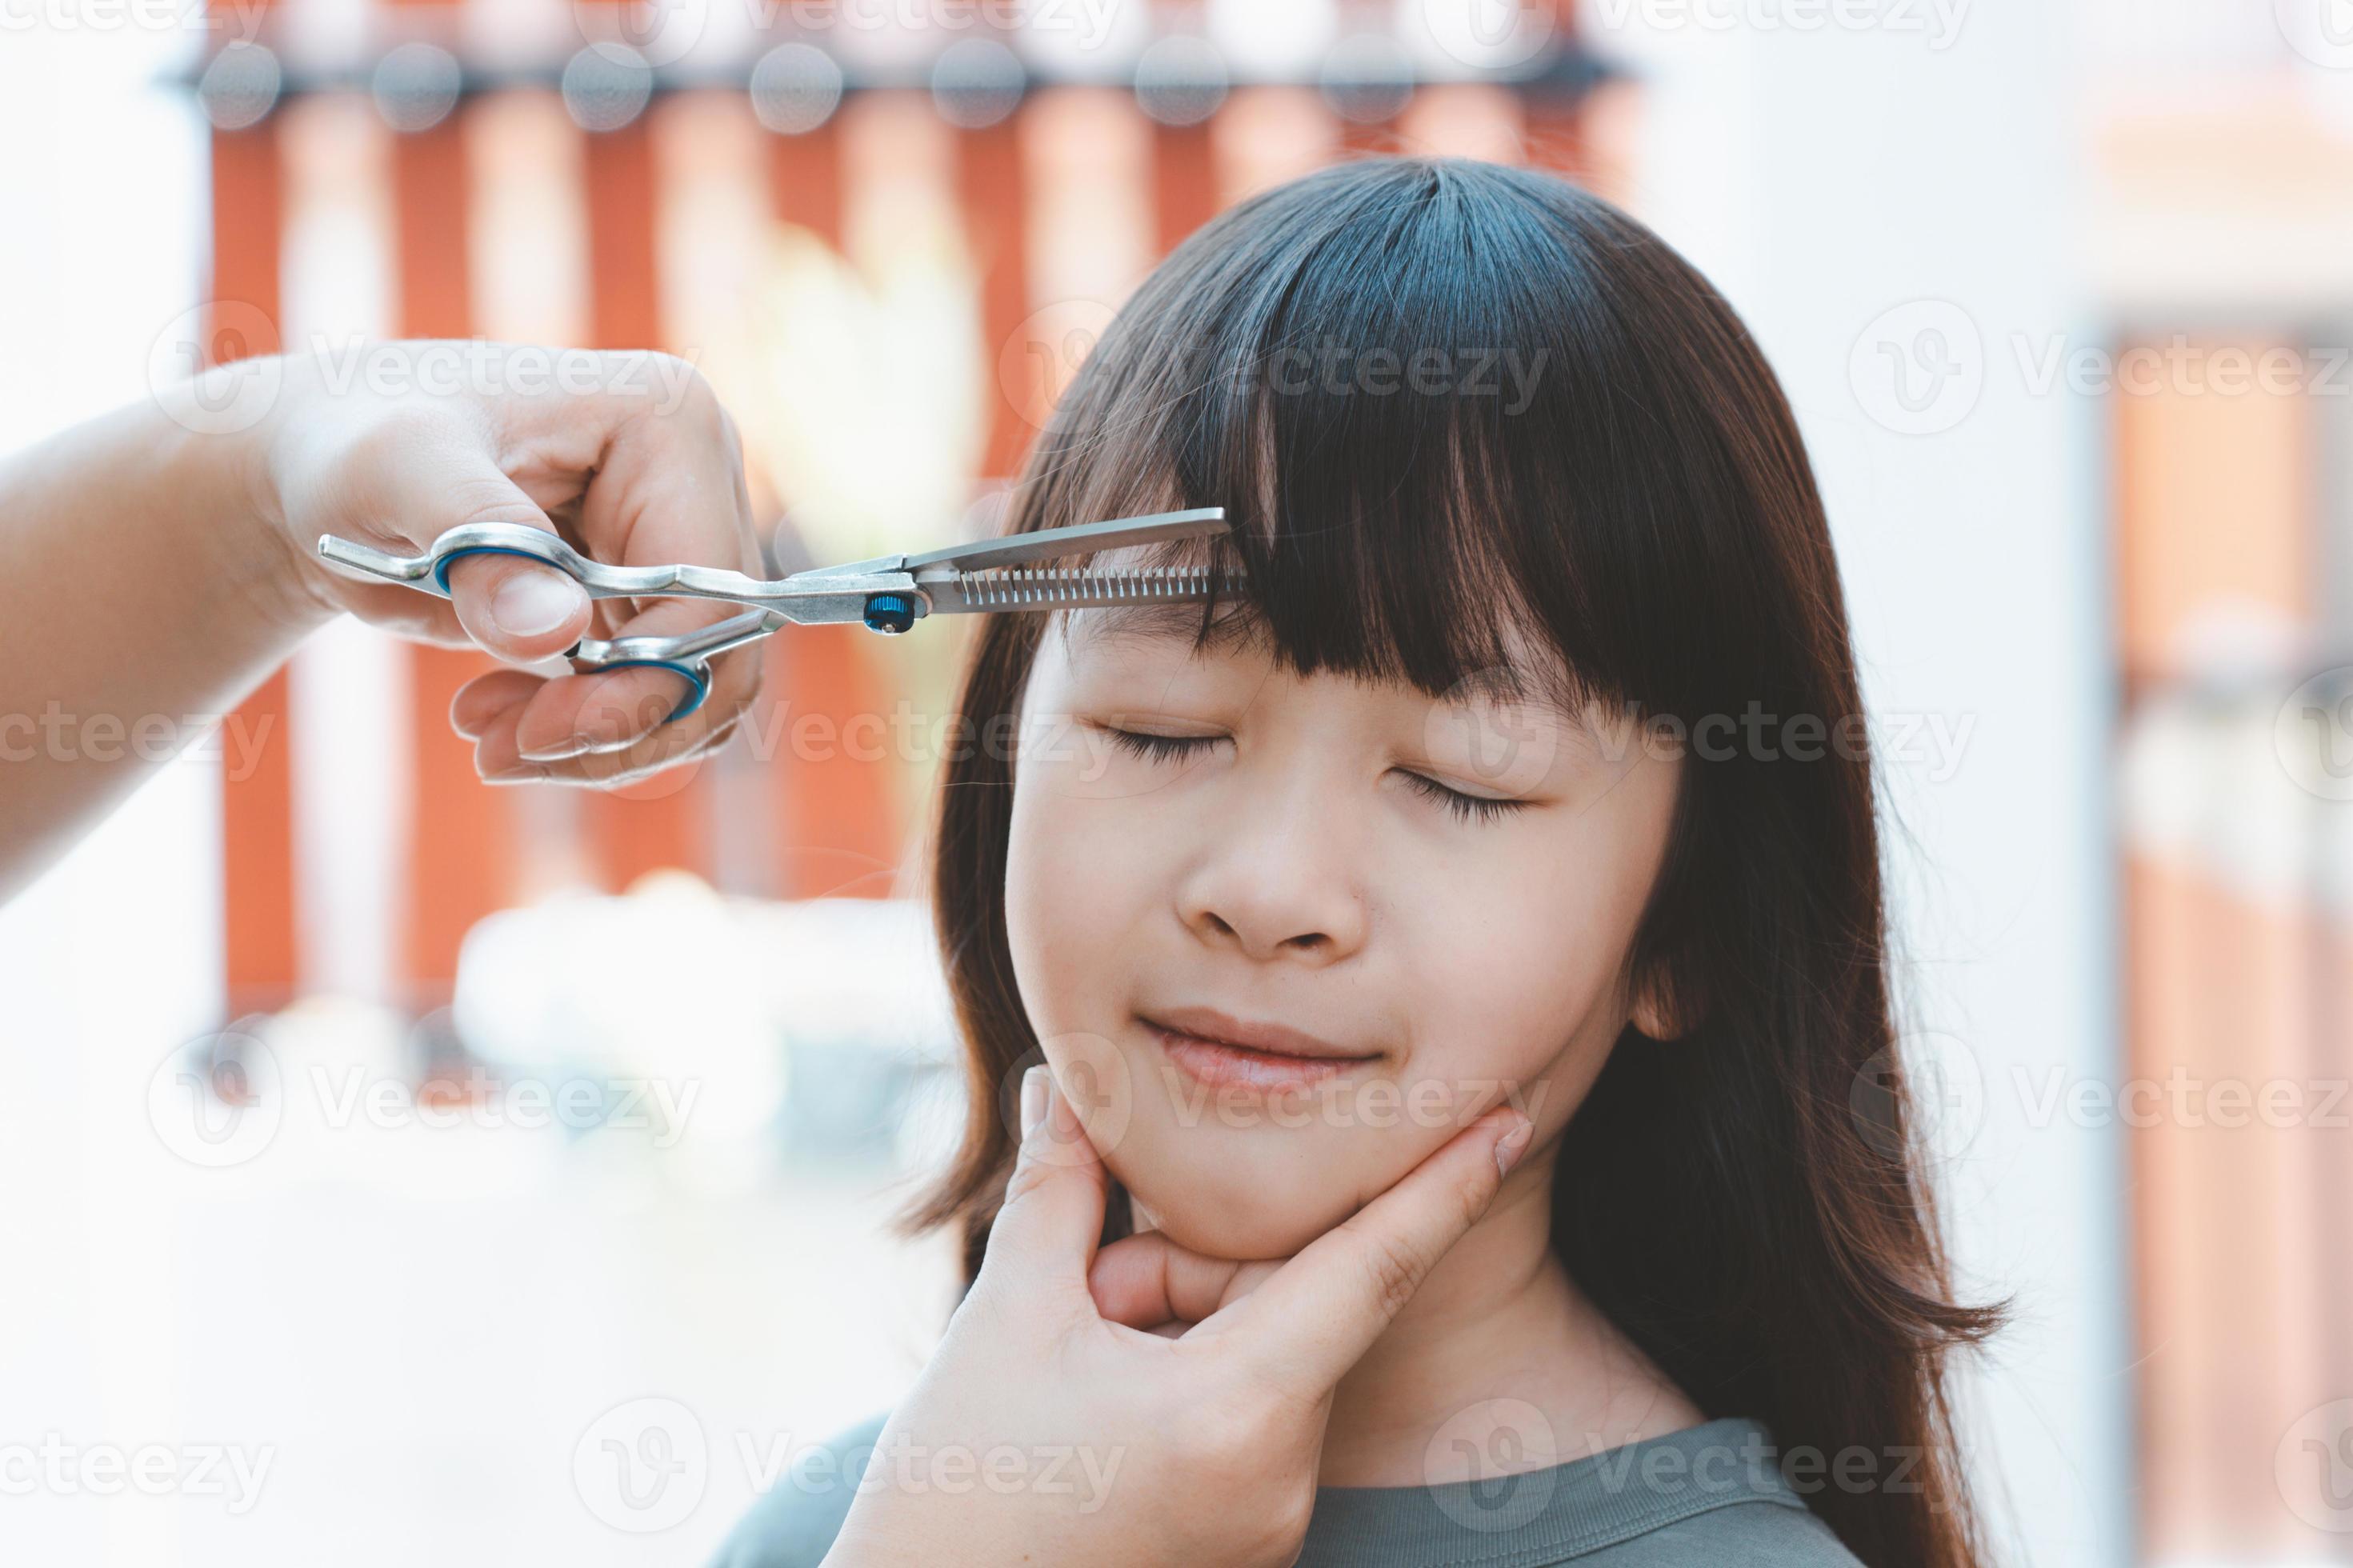 Women's hands to cut the front hair or bangs for a cute Asian girl at home.  Mothers are happy to cut their children's hair. Hair care concept 13480009  Stock Photo at Vecteezy